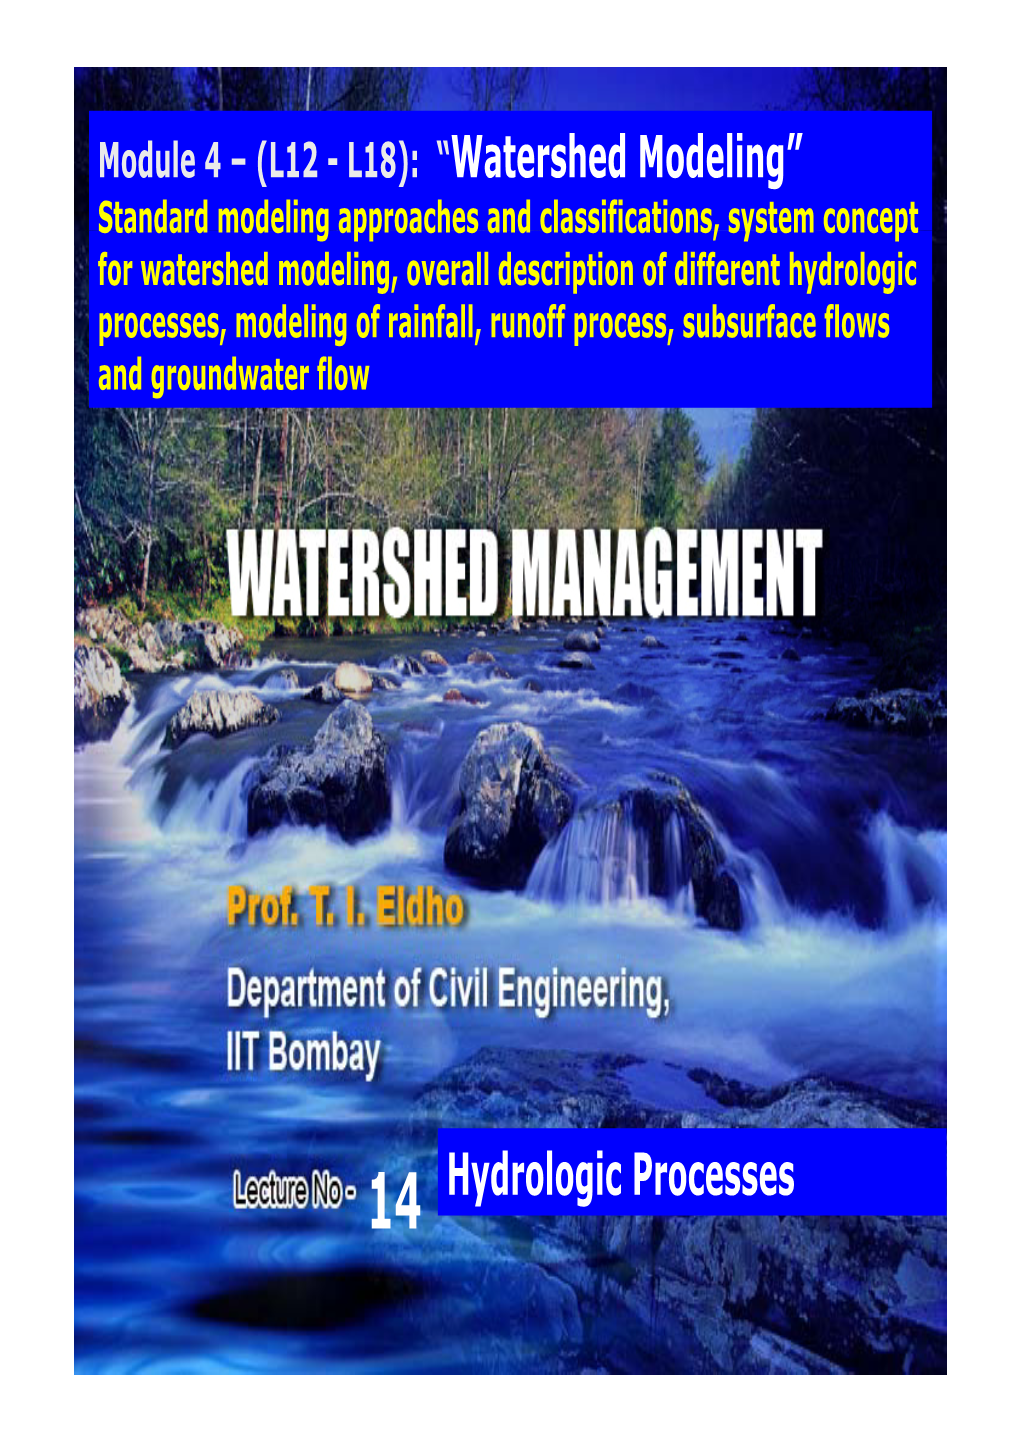 Hydrologic Processes, Modeling of Rainfall, Runoff Process, Subsurface Flows and Groundwater Flow